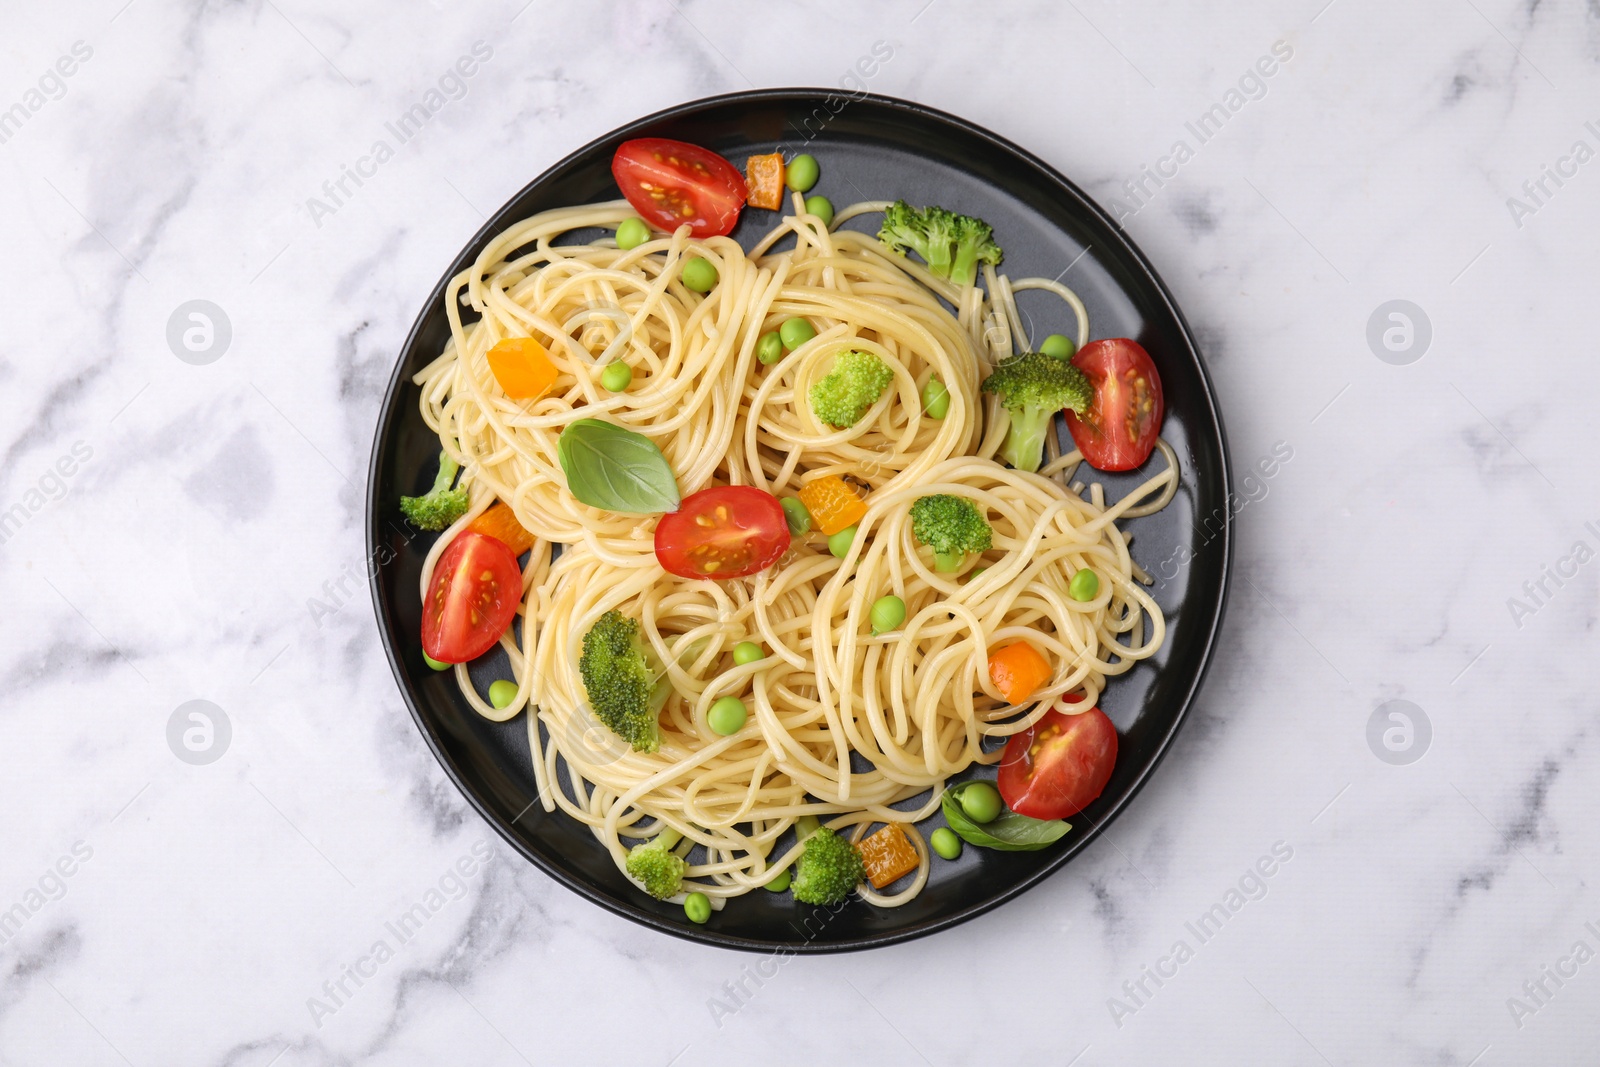 Photo of Plate of delicious pasta primavera on white marble table, top view